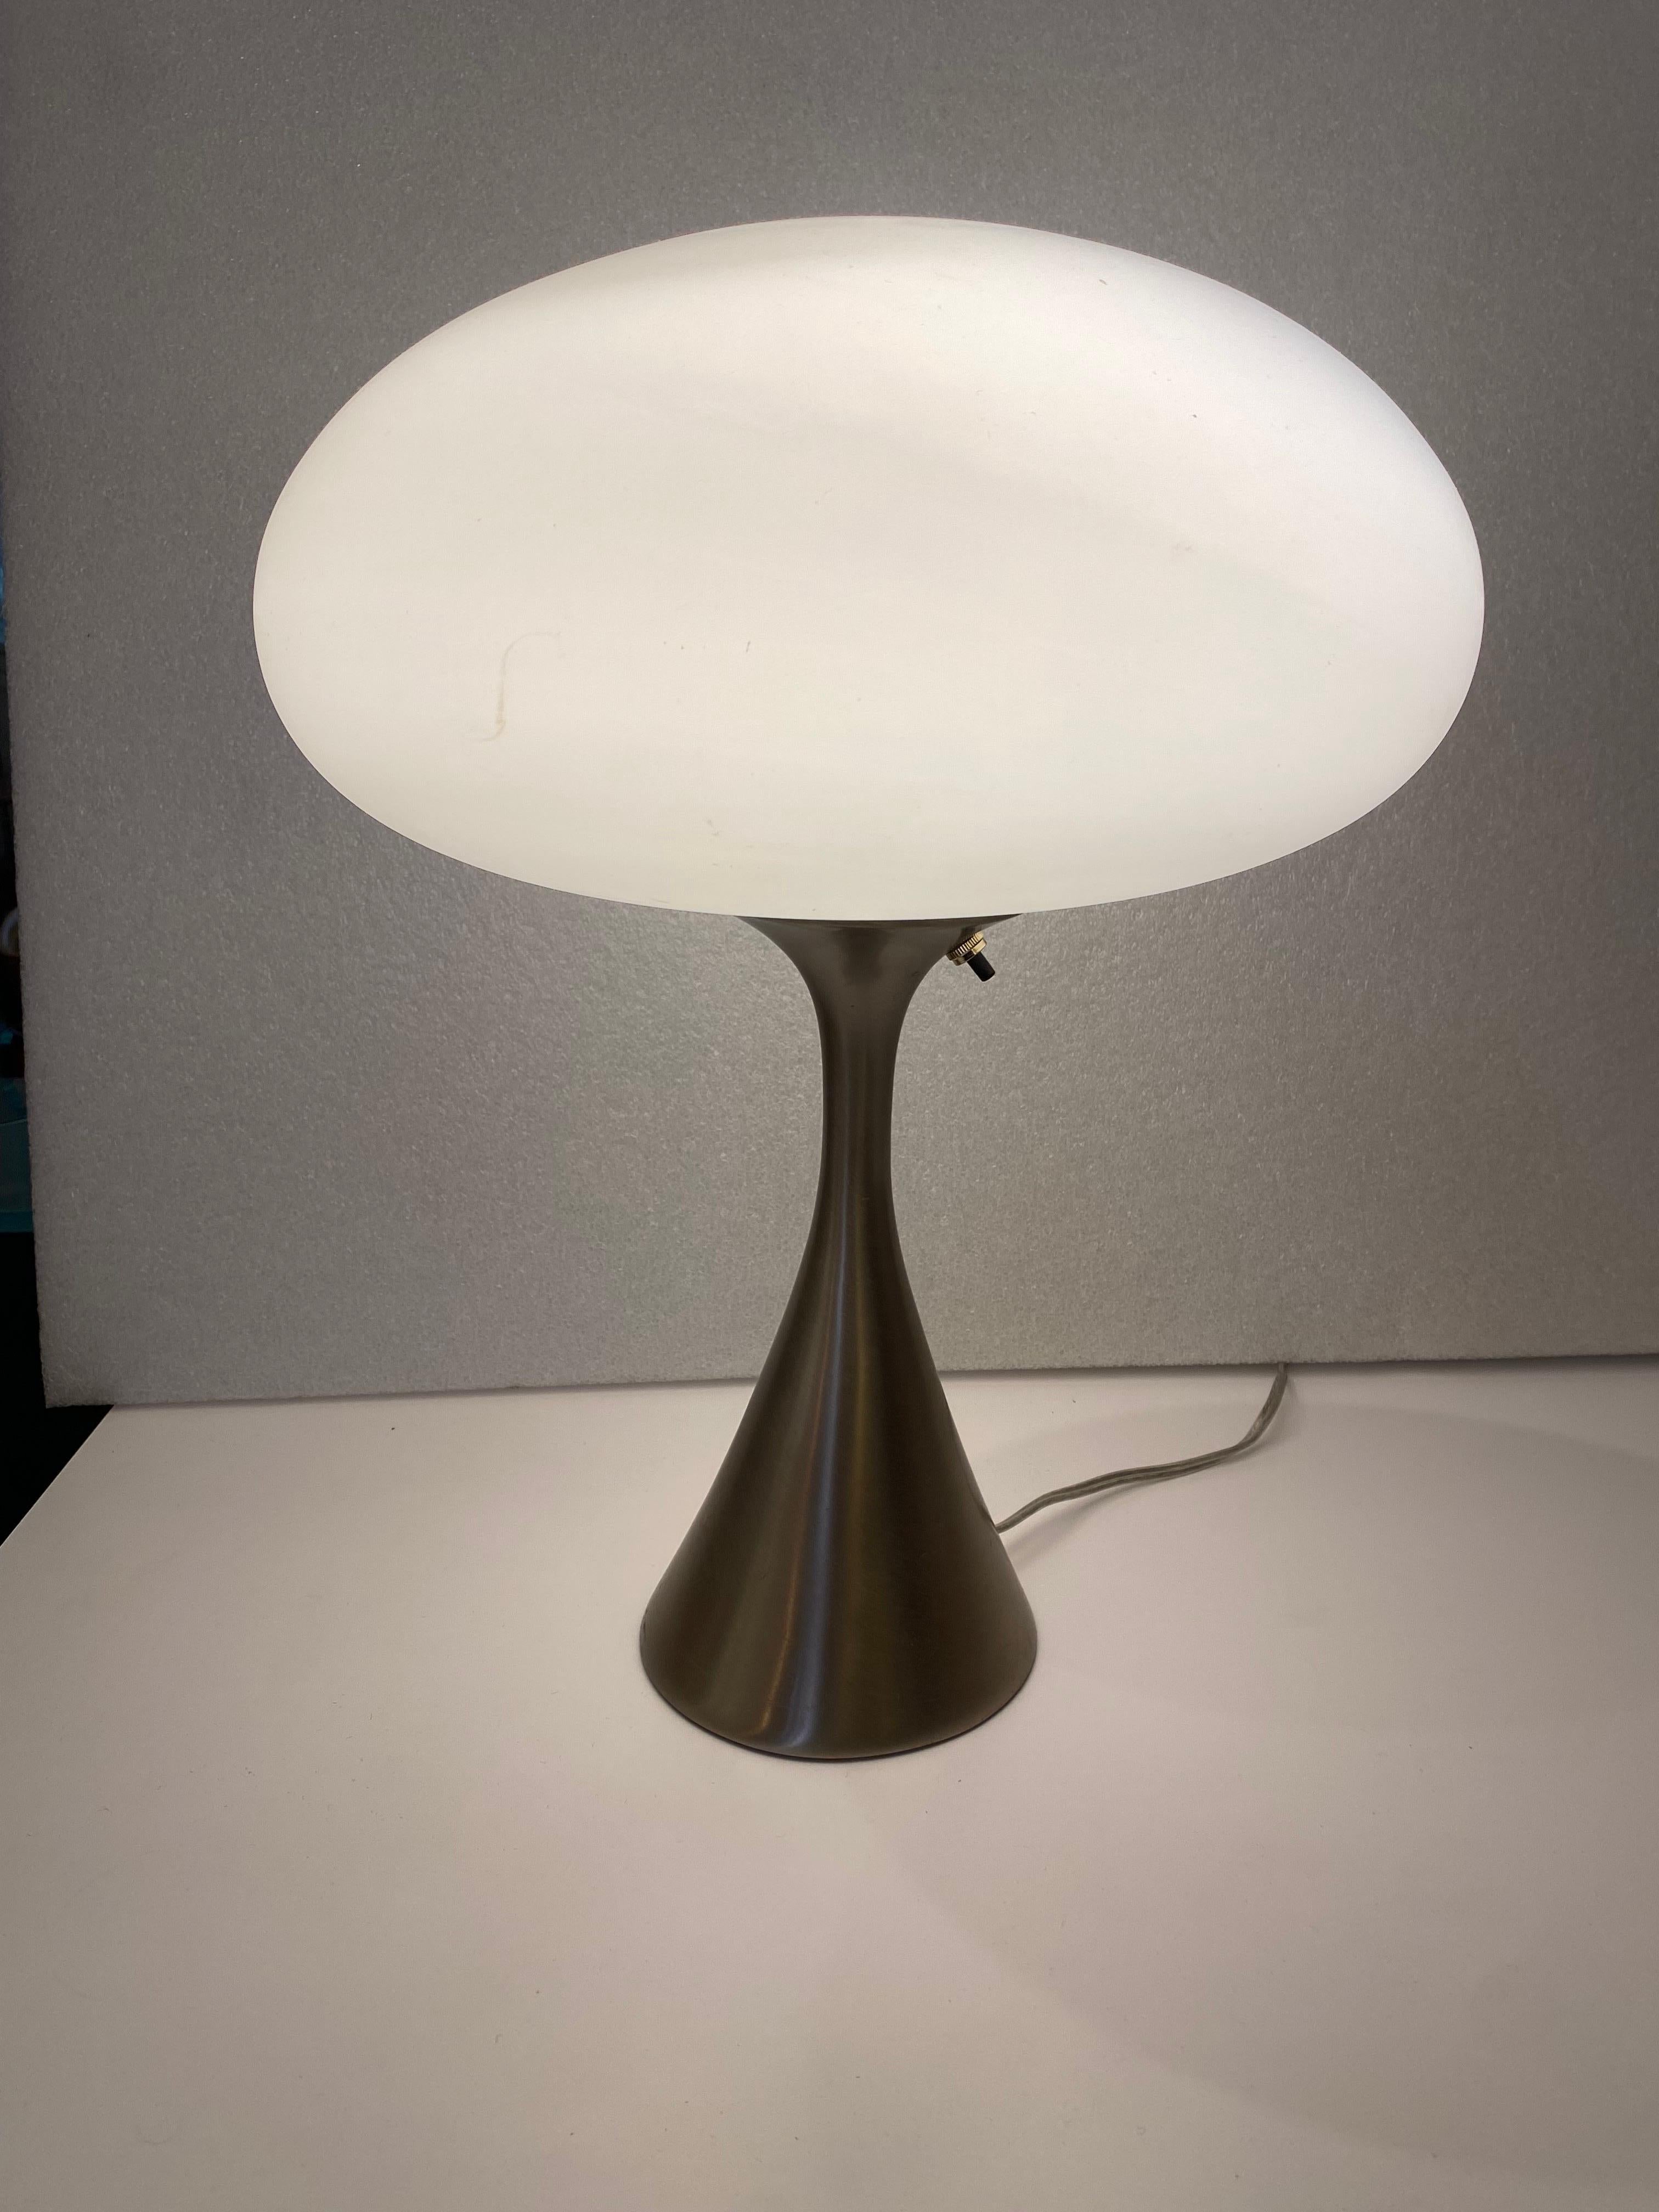 Laurel Mushroom Table Lamp in the Stainless finish. New socket and turn switch. Original shade with partial sticker still oh shade. Classic design, retains its original label! In very nice shape!